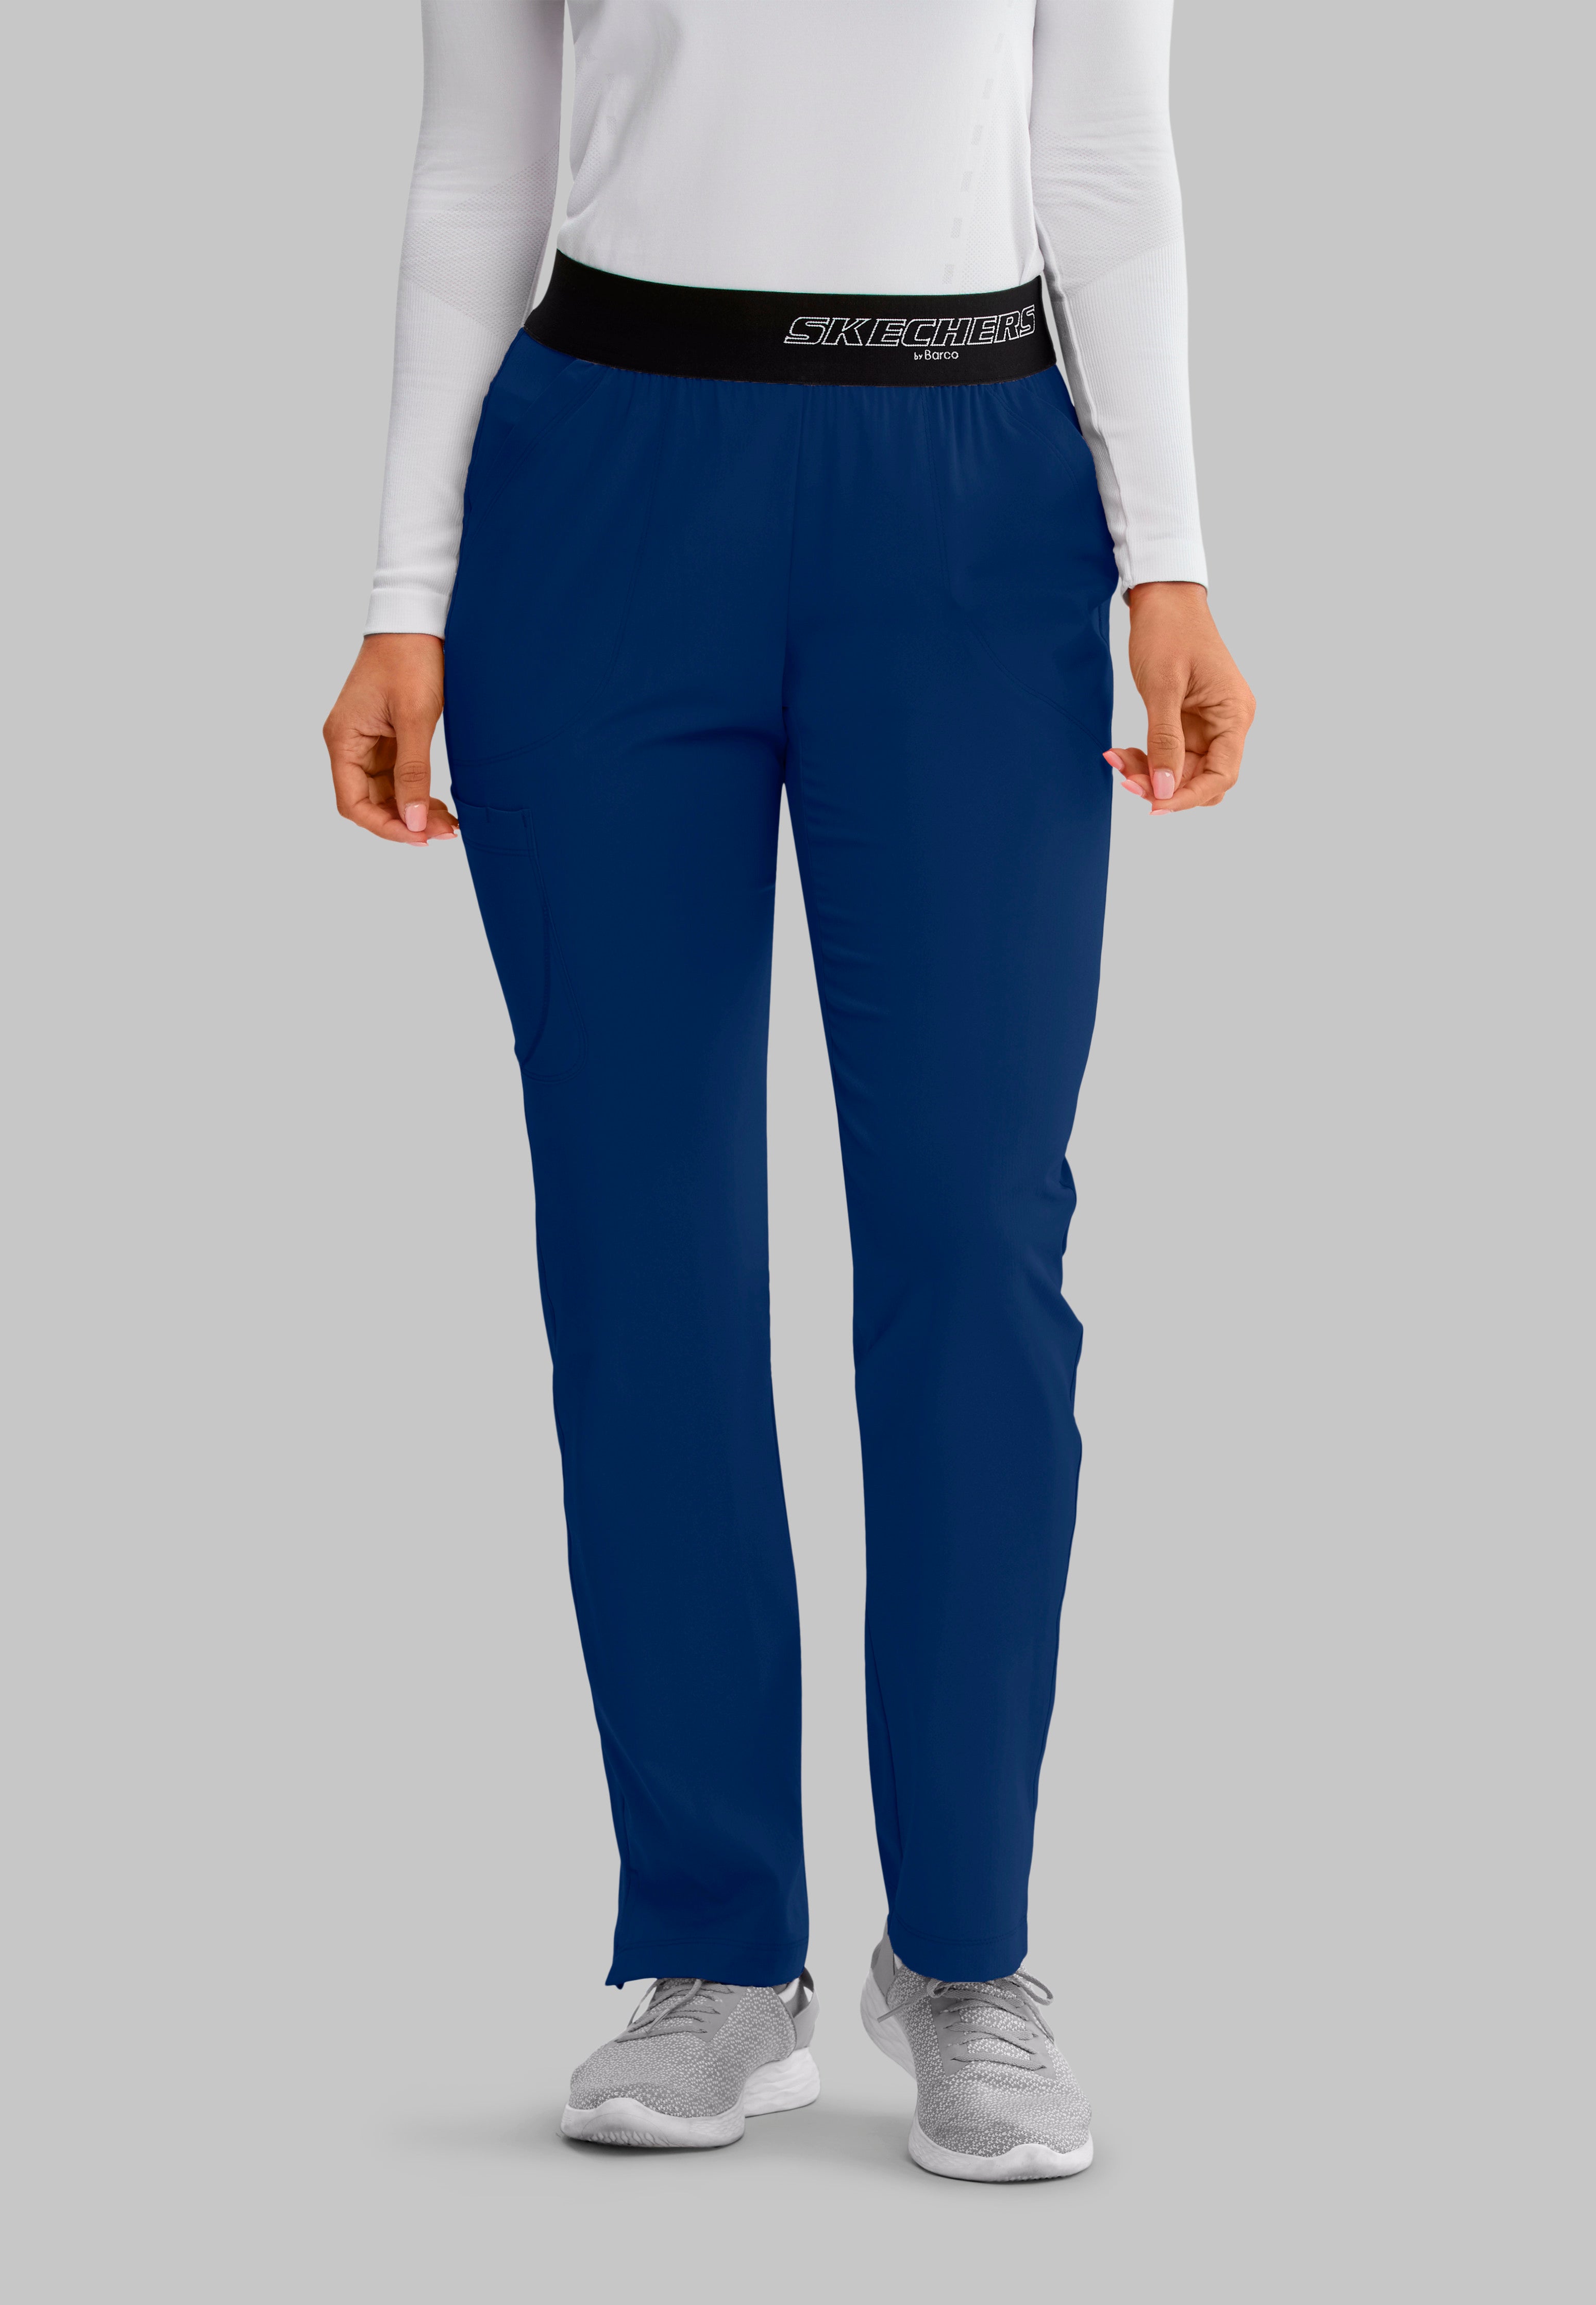 Skechers Scrub Pants Blue Size XS petite - $25 (28% Off Retail) - From Emily